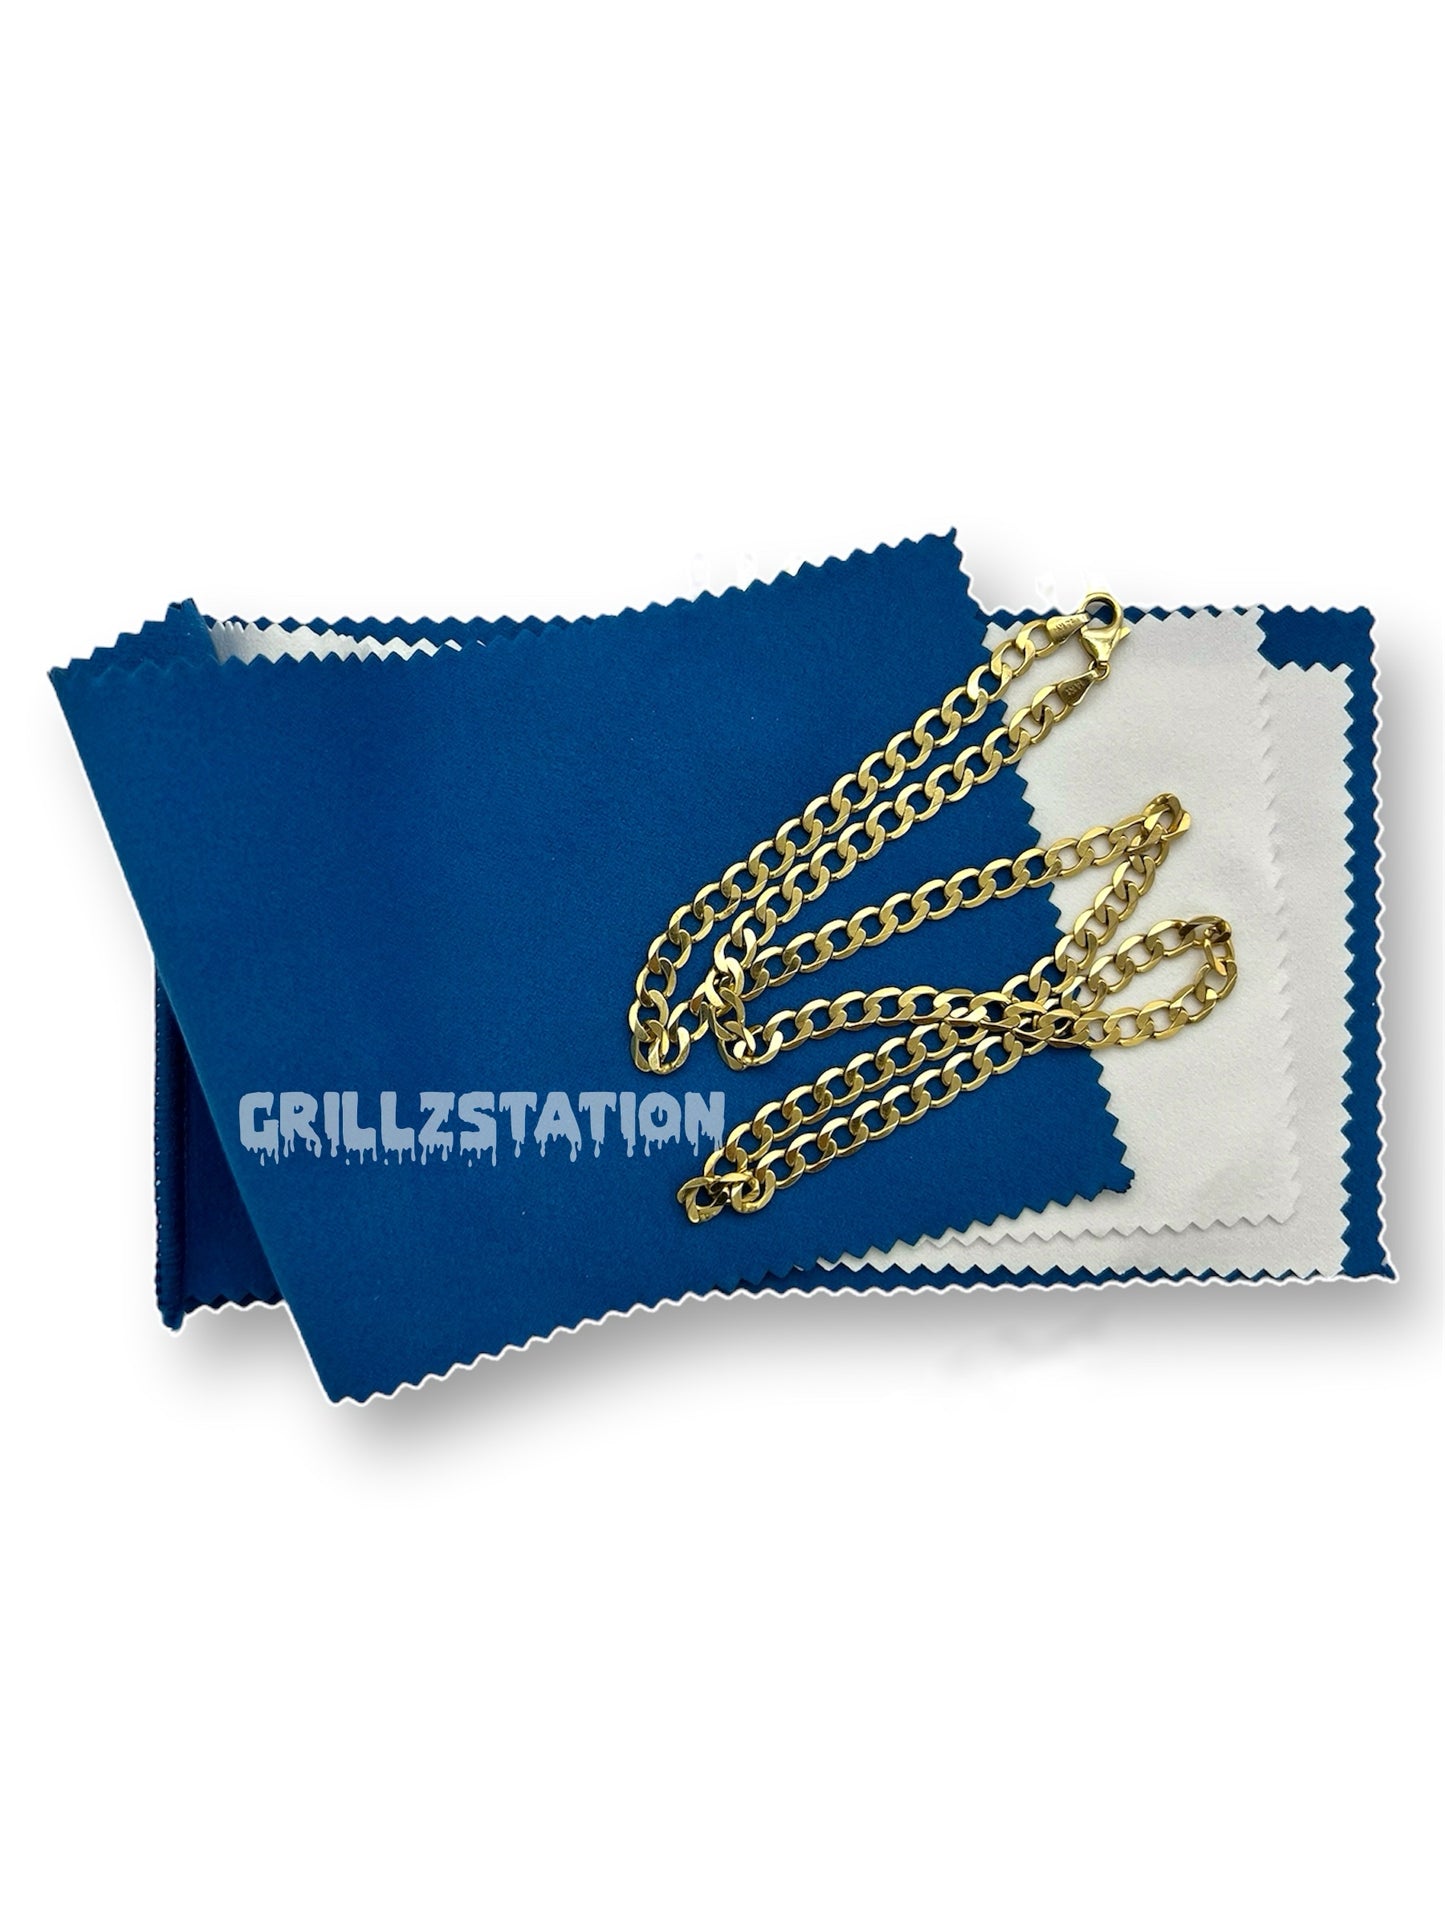 JEWELRY CLEANING POLISH CLOTH - GRILLZSTATION 